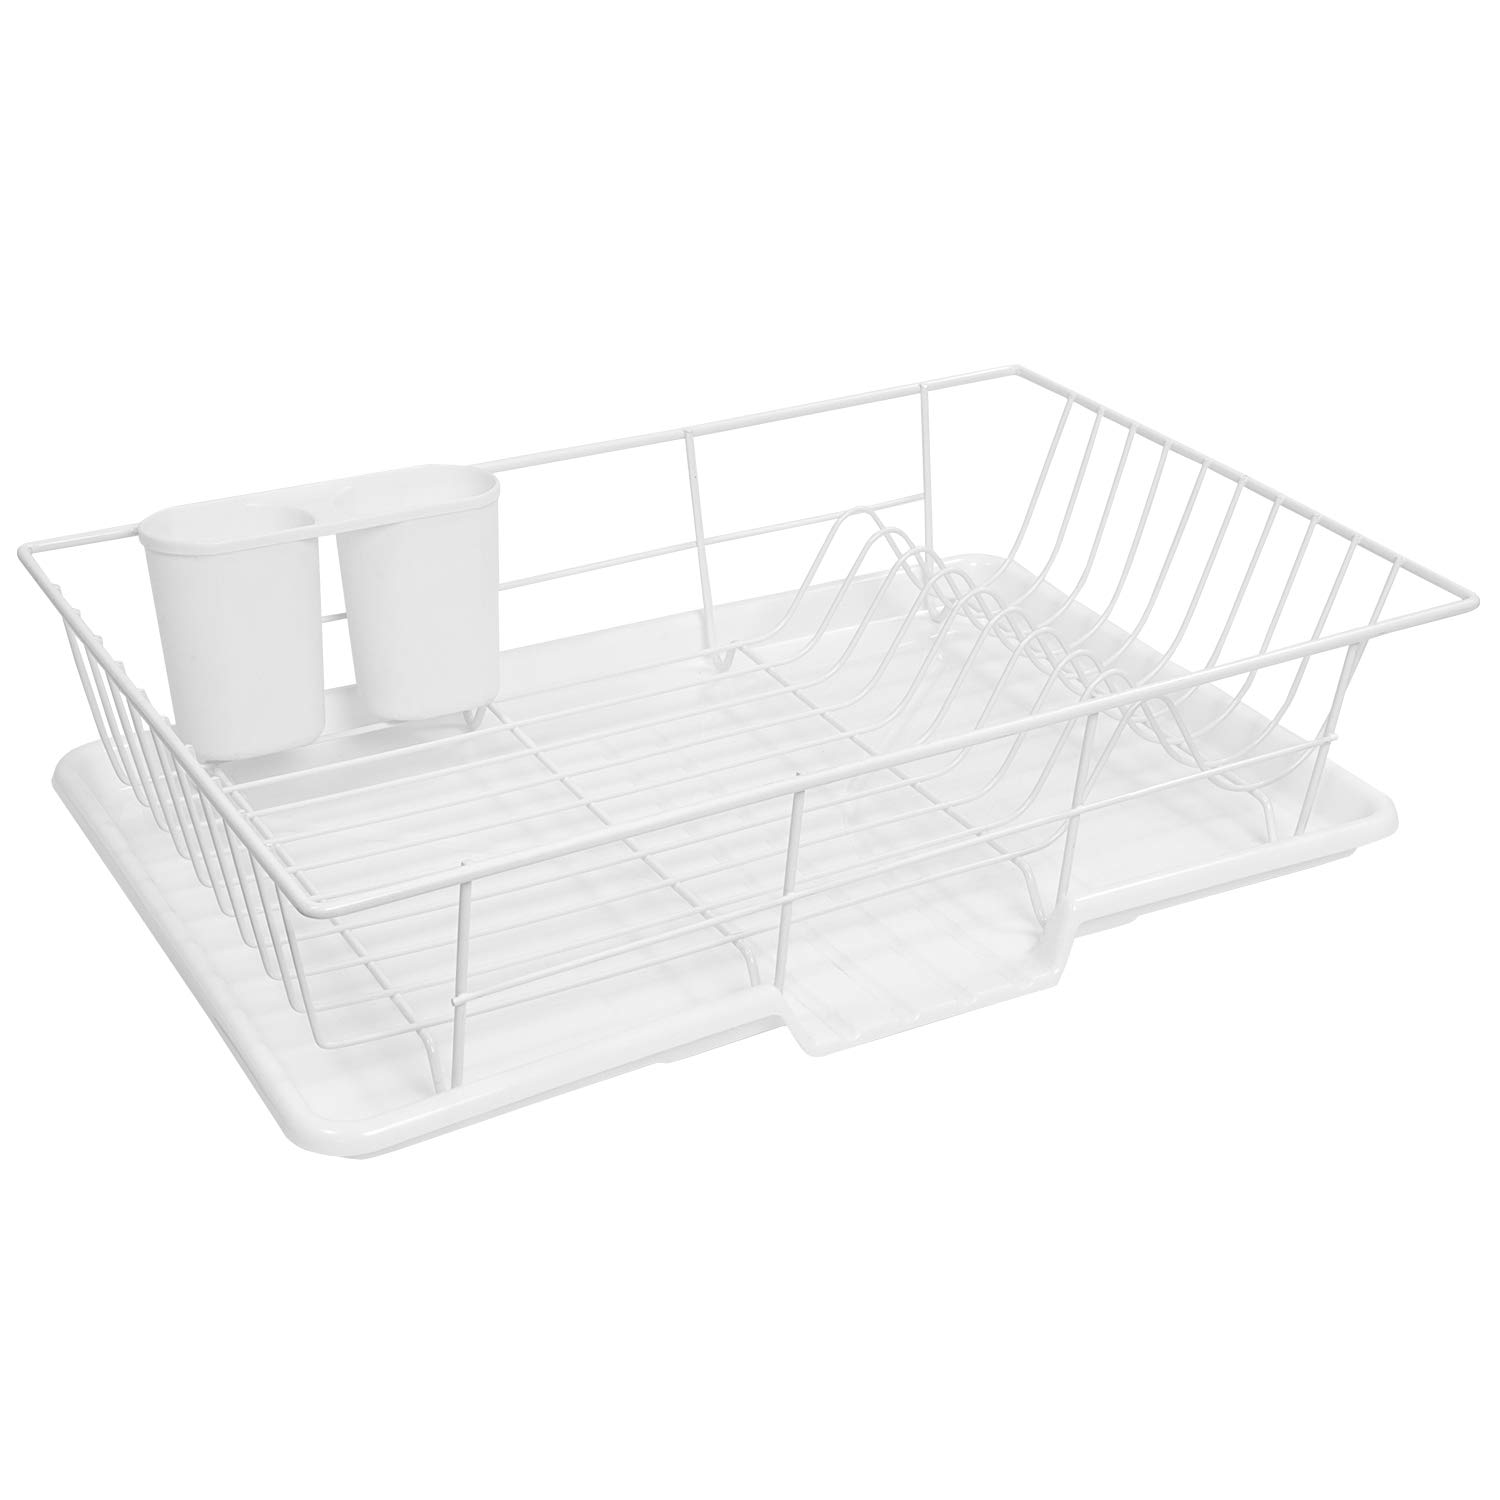 Sweet Home Collection Space-Saving 3-Piece Dish Drainer Rack Set: Efficient Kitchen Organizer for Quick Drying and Storage - Includes Cutlery Holder and Drainboard - Maximize Countertop Space, White